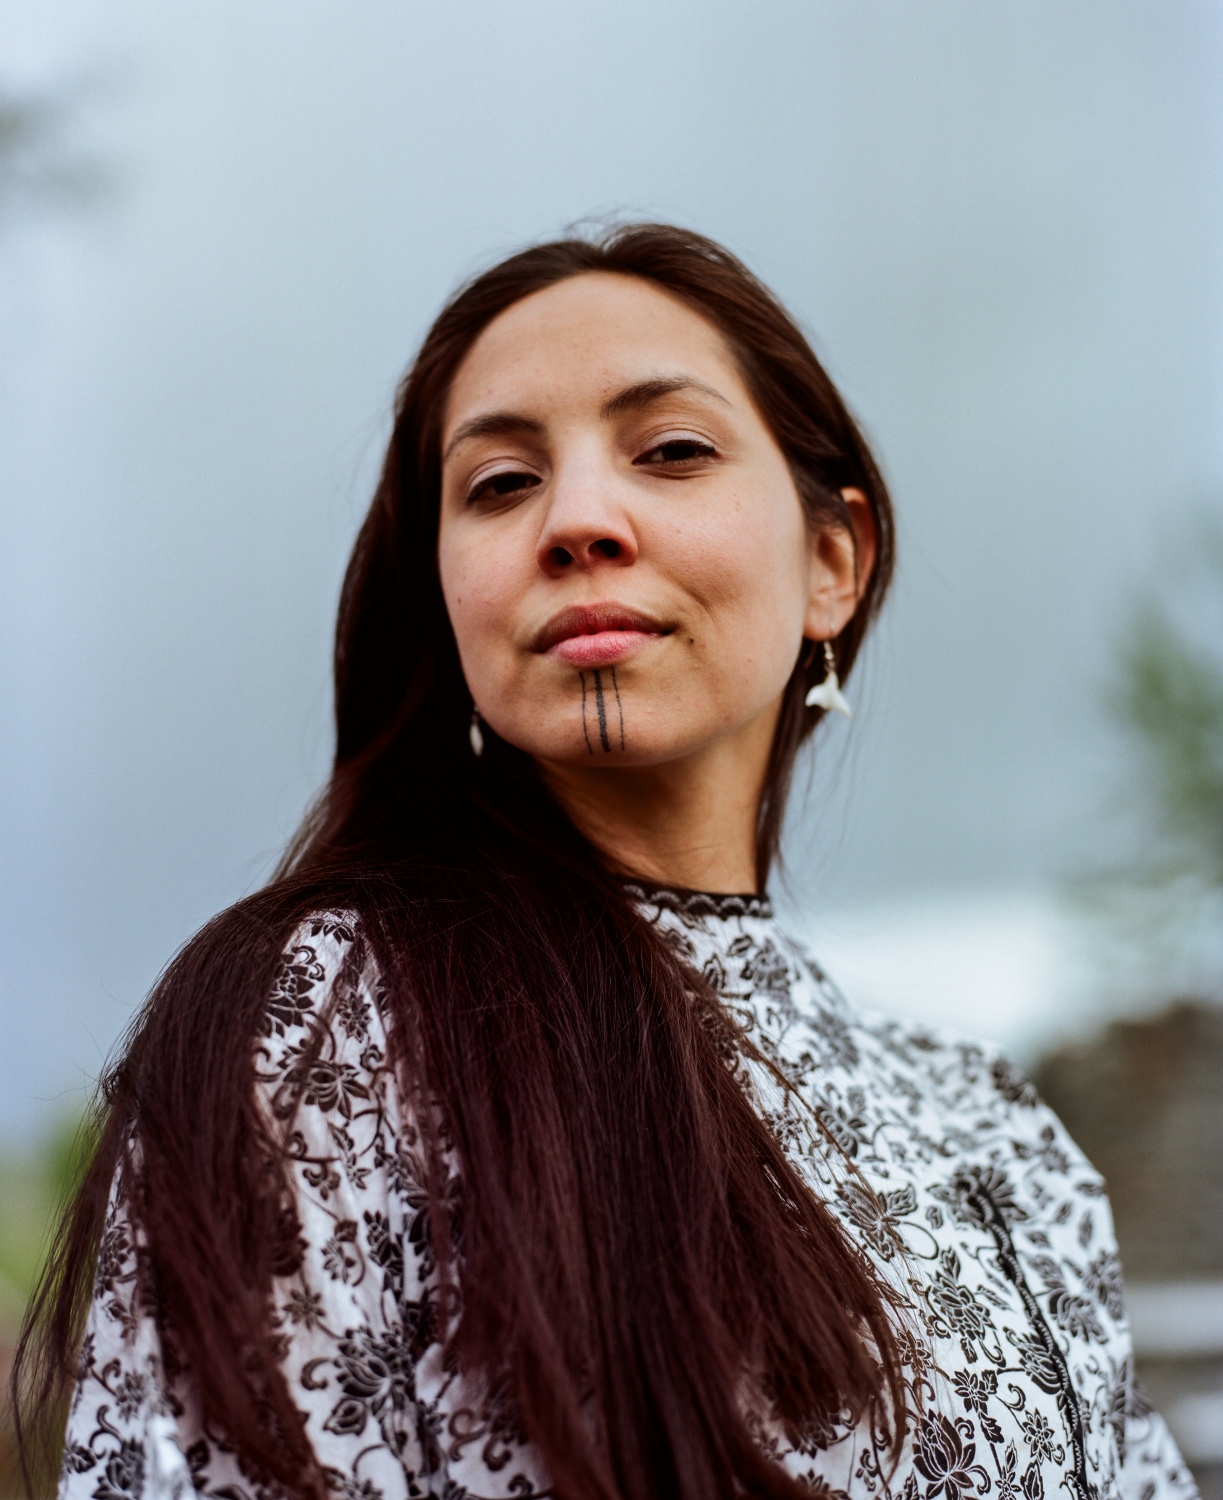  Denise Pollock, 28, who goes by her Inupiaq name Annauk, is an Inupiaq language teacher in...